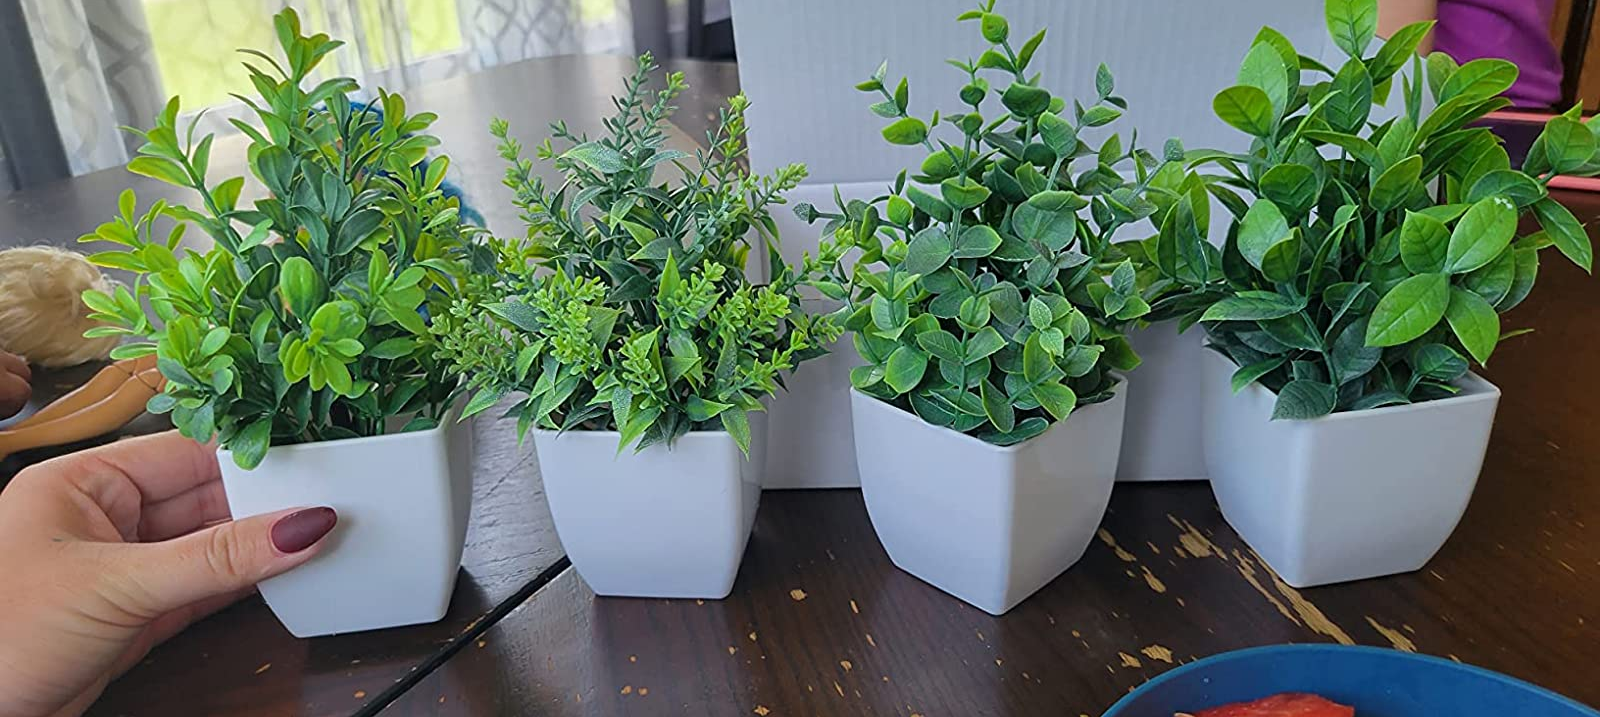 39 Boxwood Garland Artificial Plants Greenery Garland Fake Hanging Plants  Greenery Vine Garland UV for Home Shelve Wall Indoor Outside Hanging Basket  Decor 